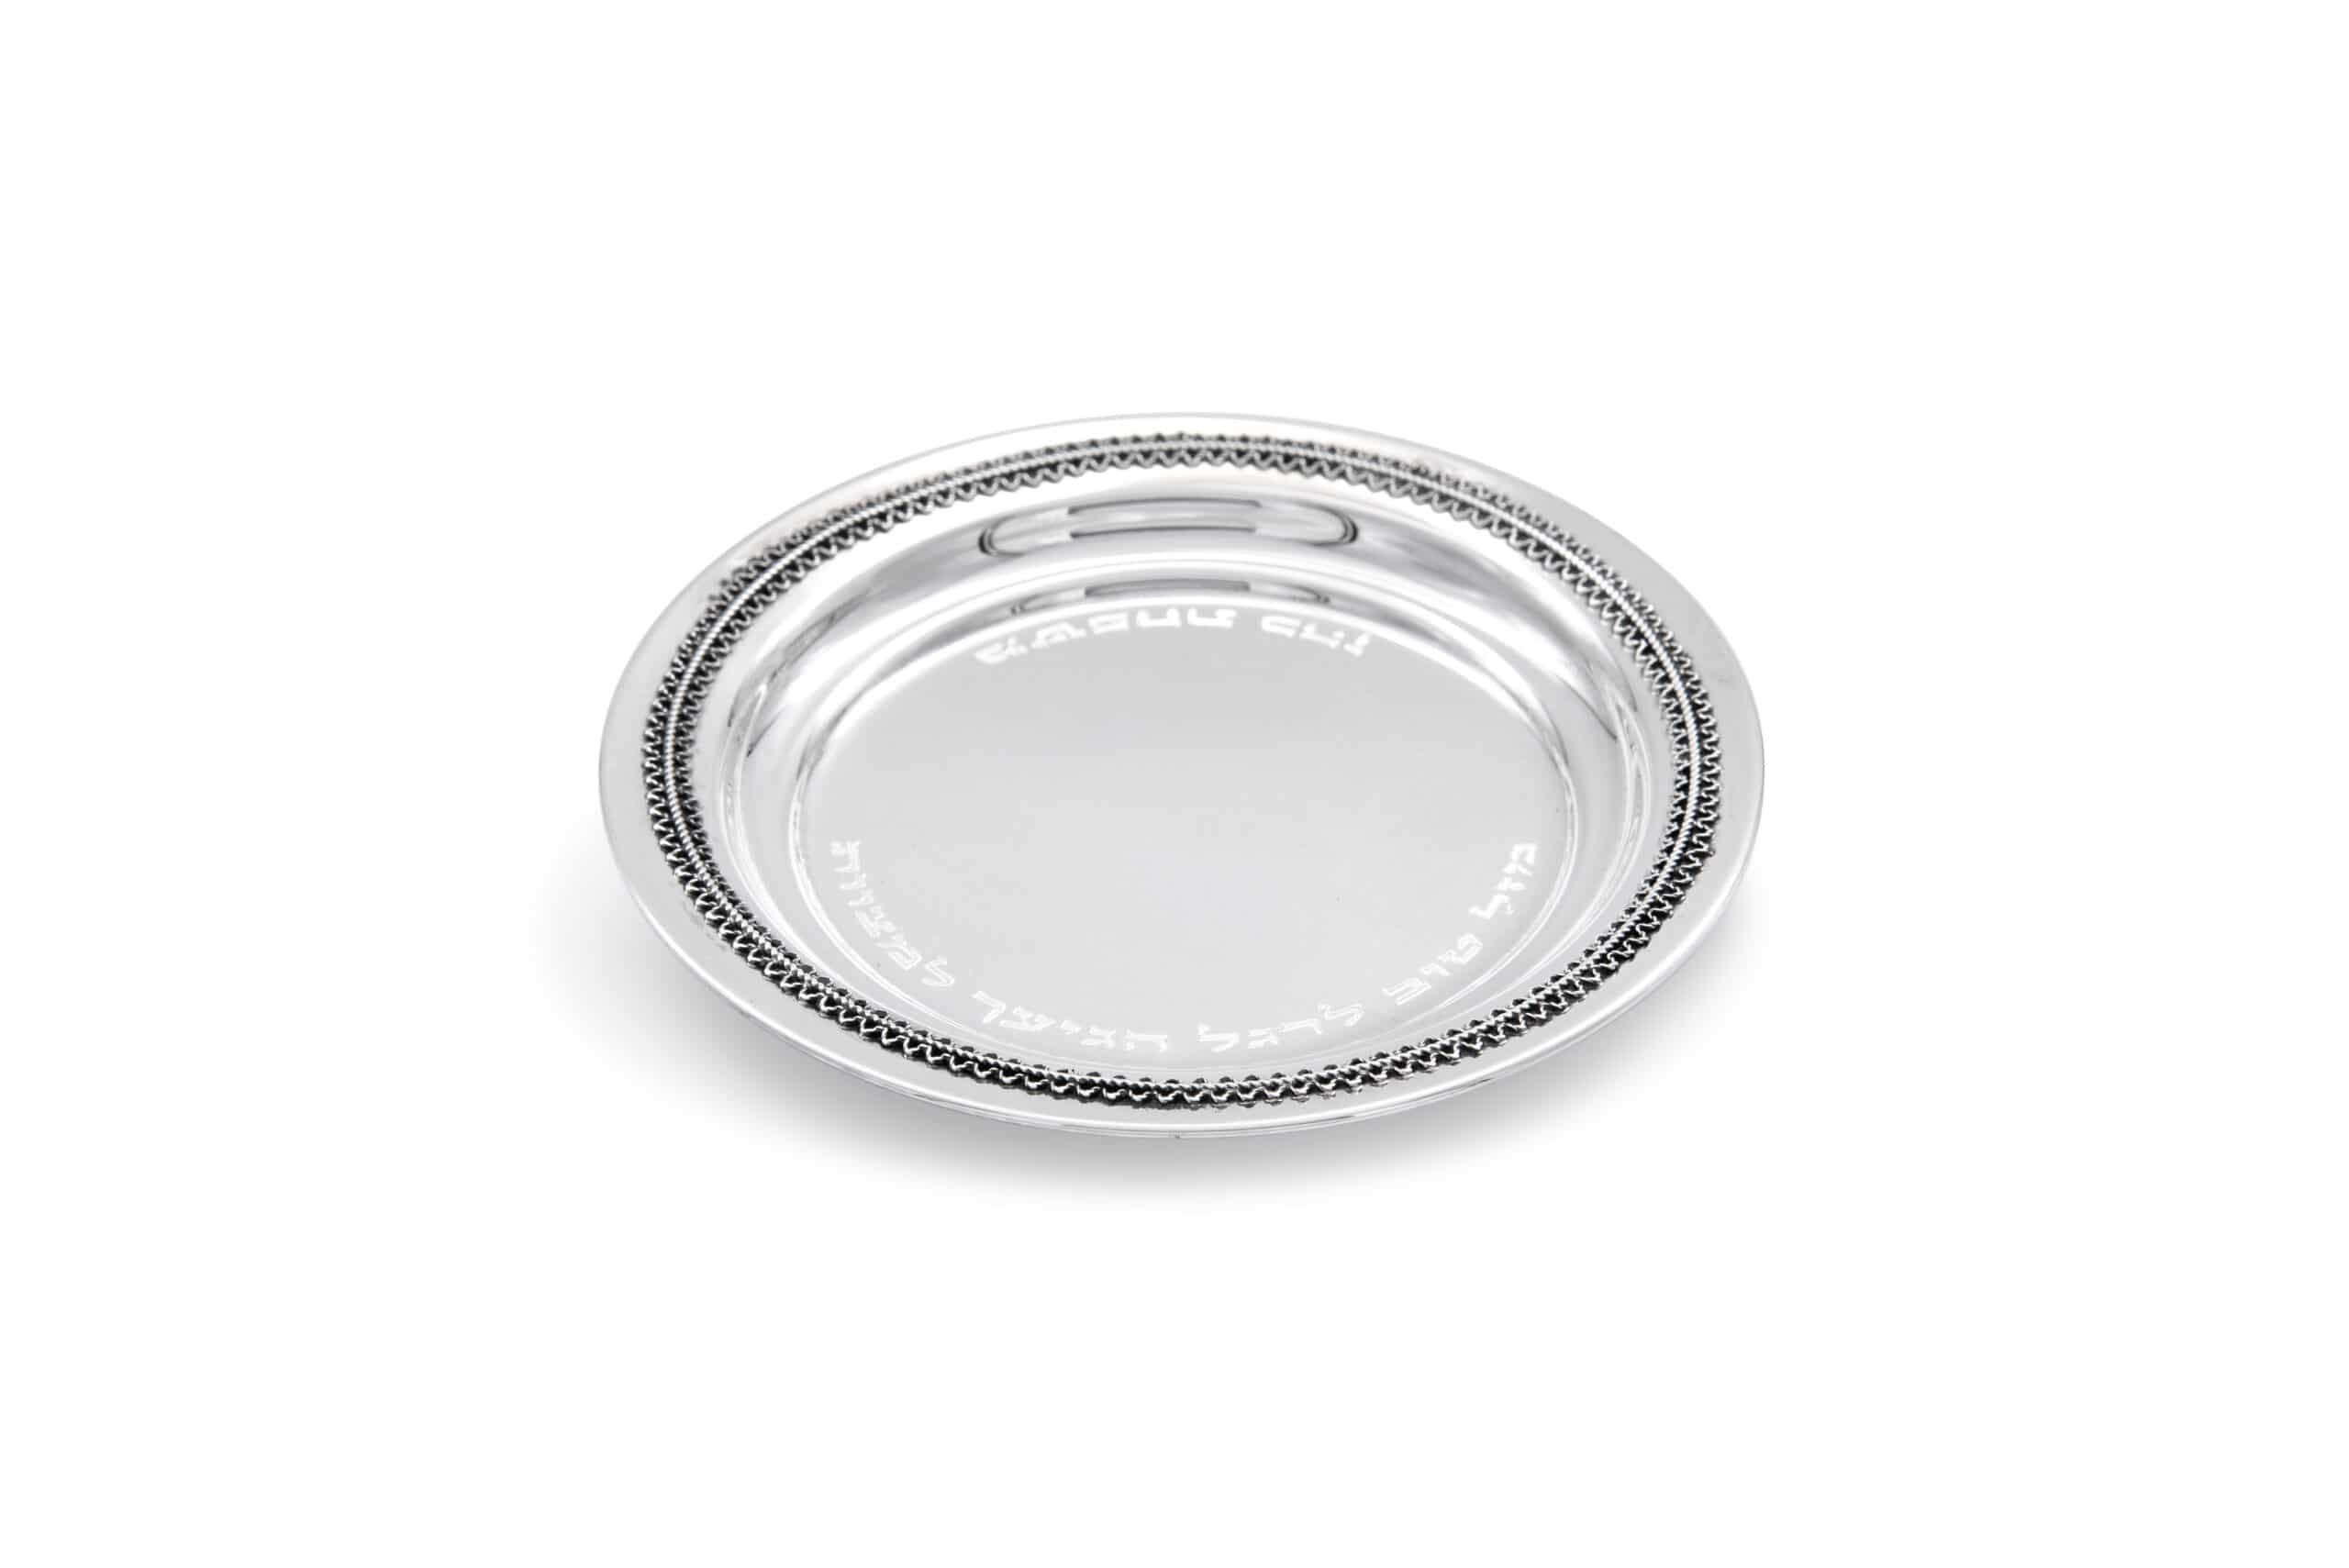 Sterling Silver Plate for Kiddush with Filigree